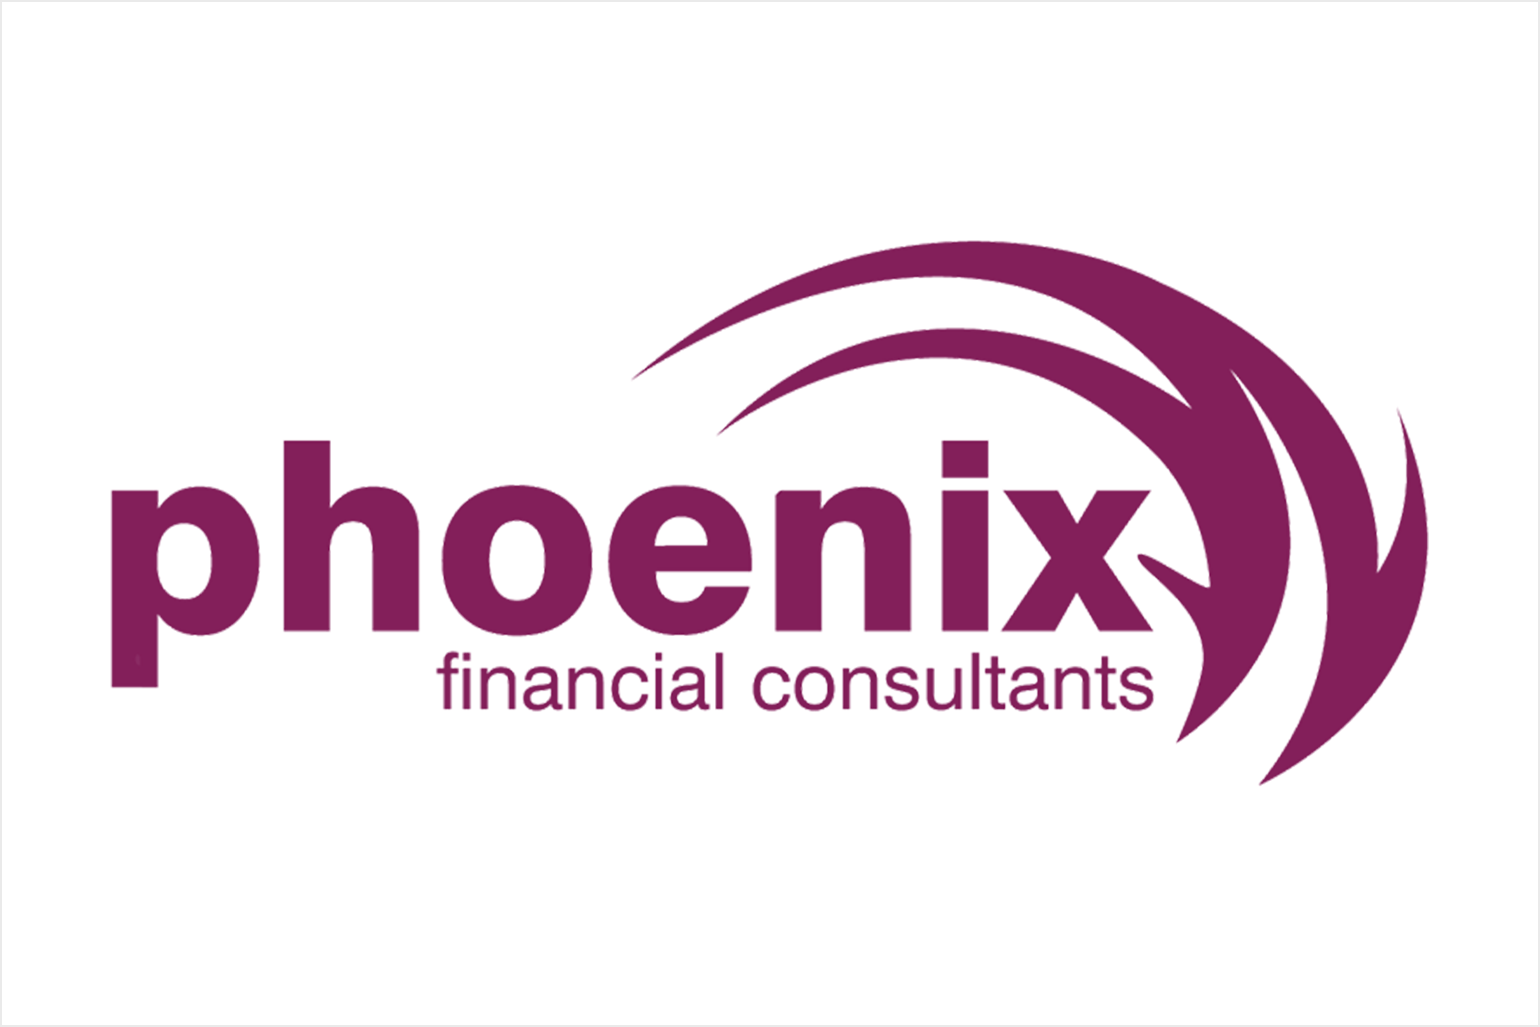 phoenix financial services number